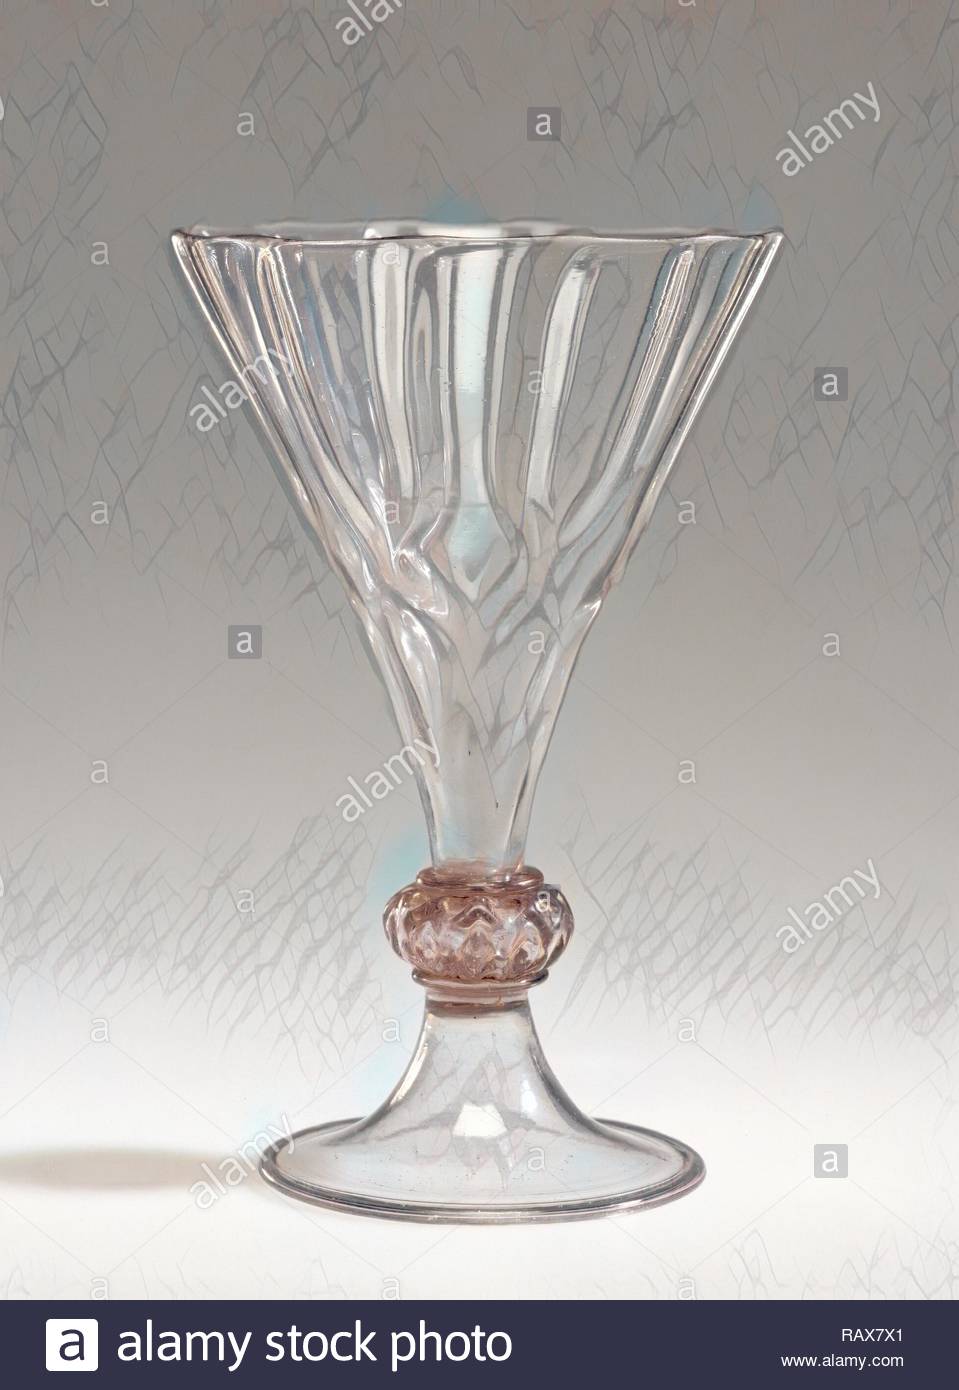 goblet kelchpokal unknown maker faon de venise possibly the glashtte of wolfgang vitl austrian active 1534 reimagined RAX7X1